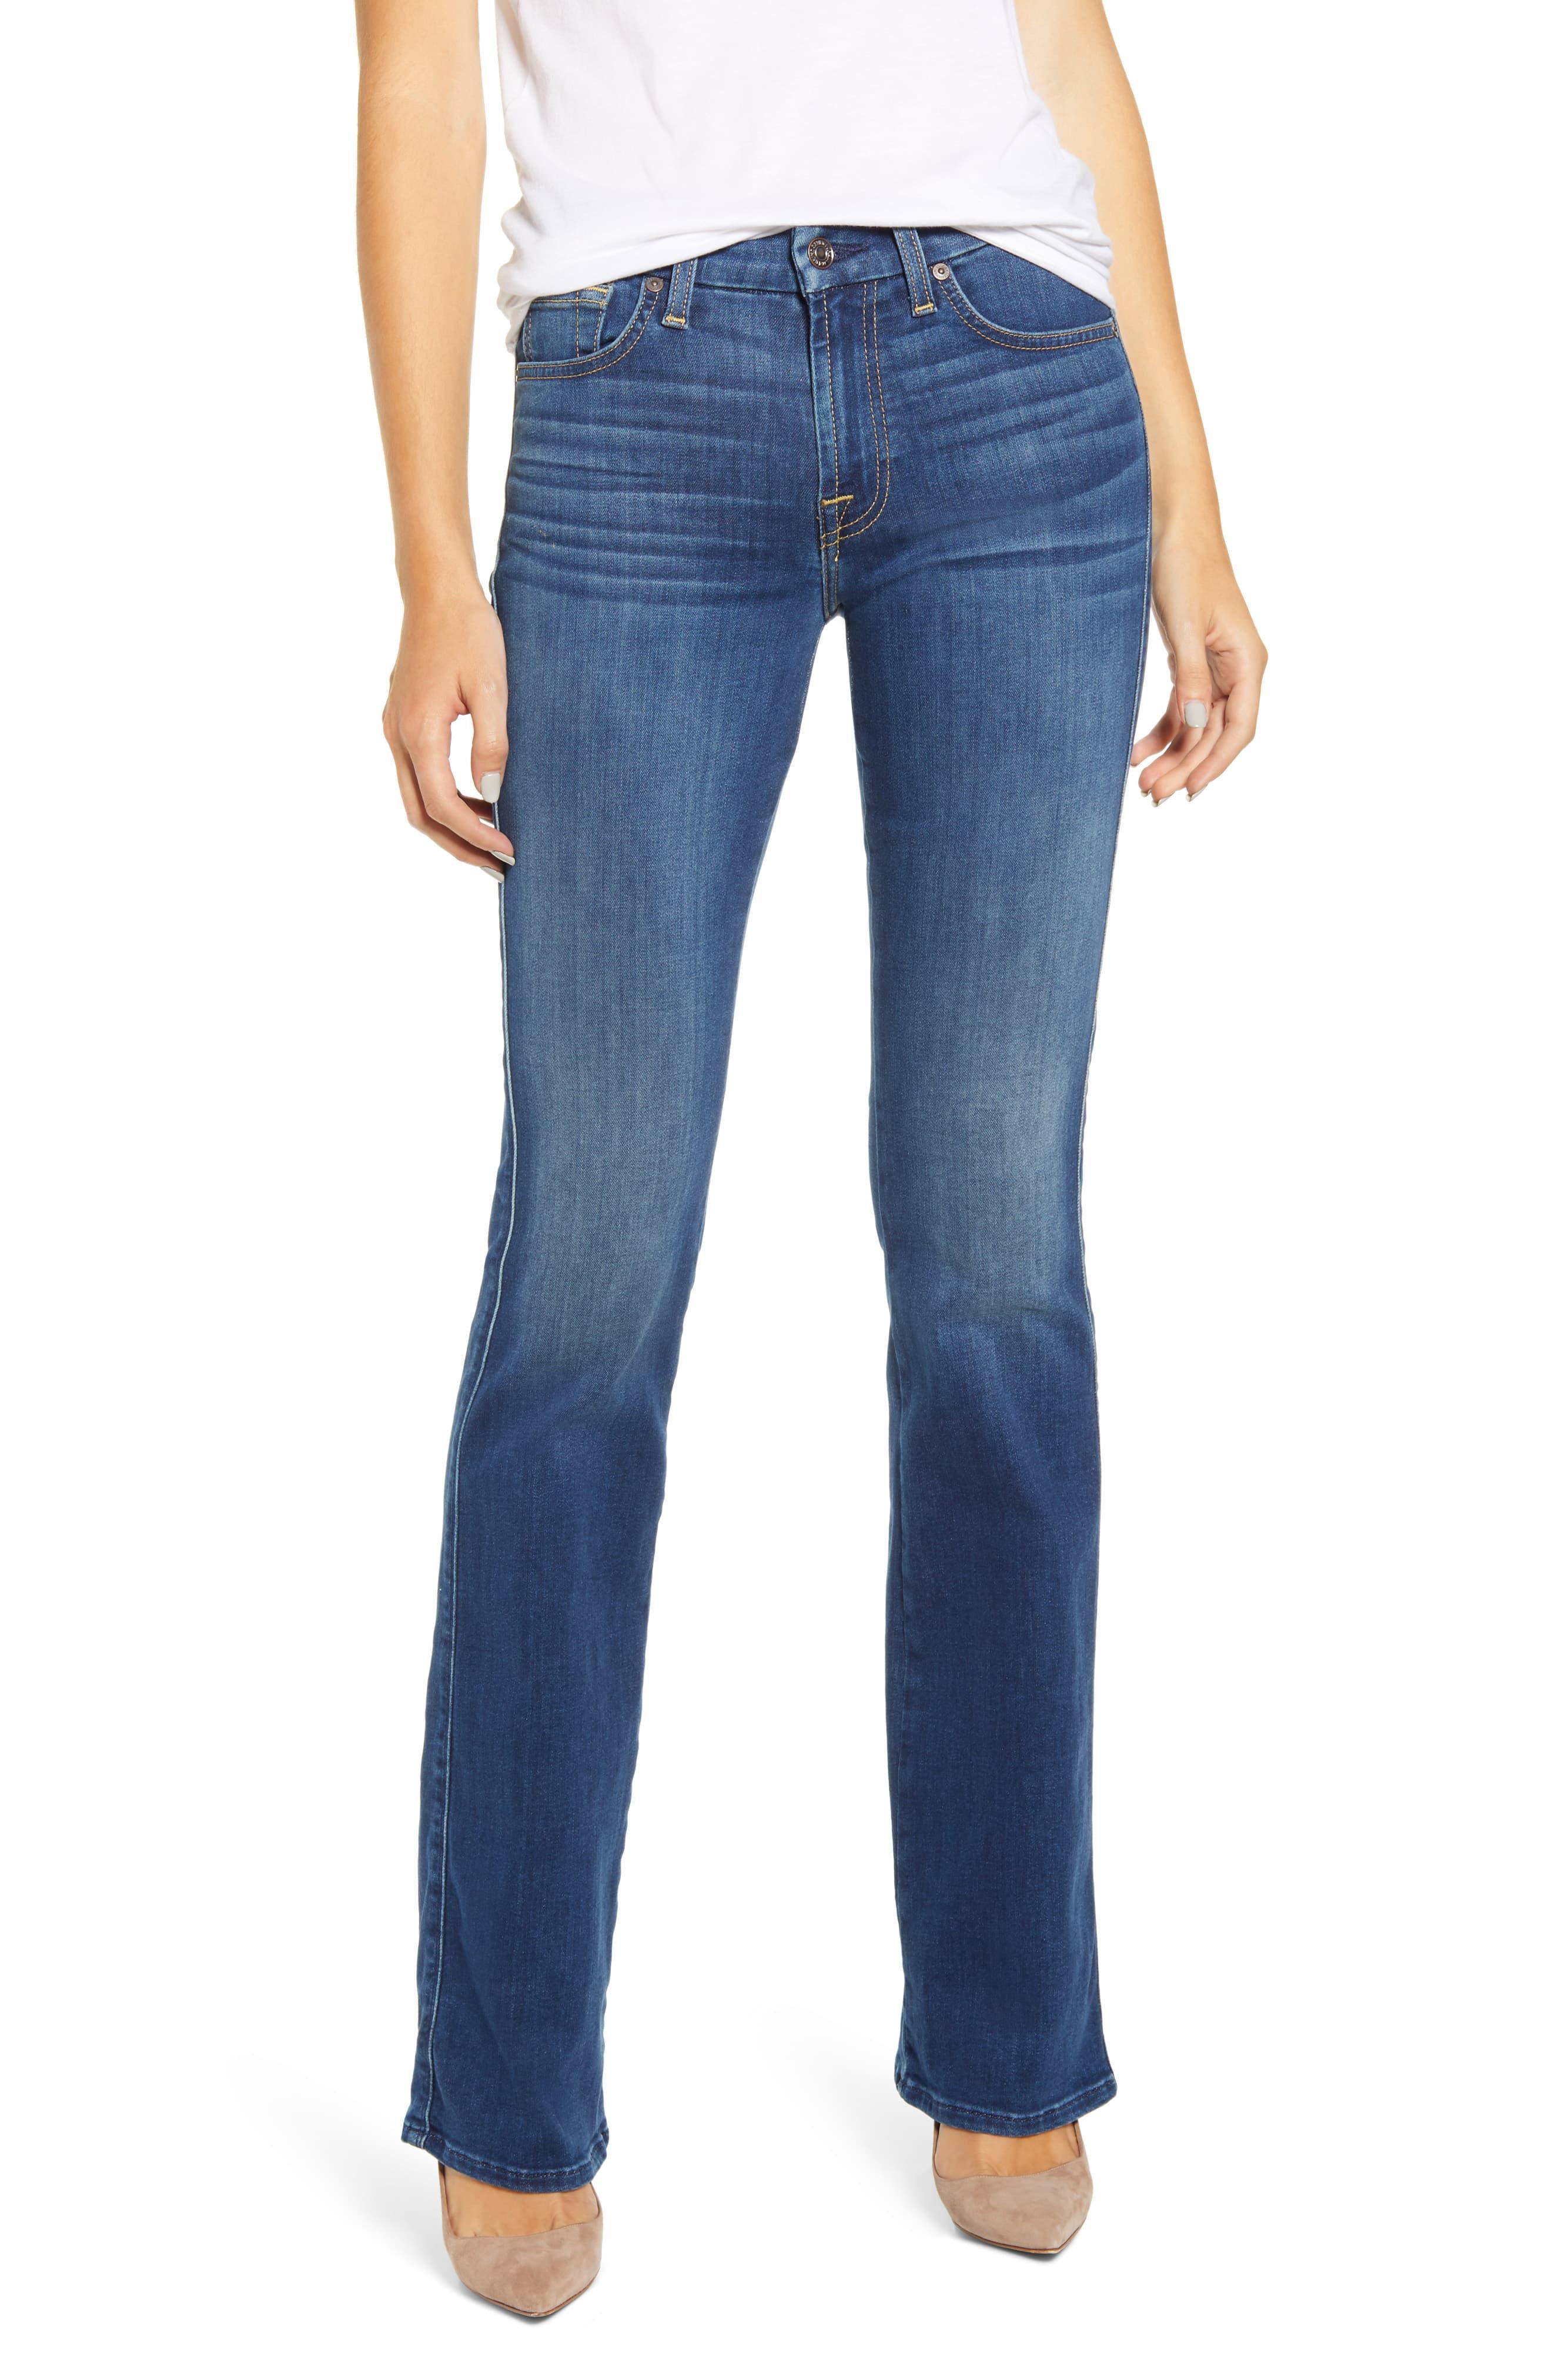 7 For All Mankind Denim 7 For All Mankind Kimmie Bootcut Jeans in Blue ...